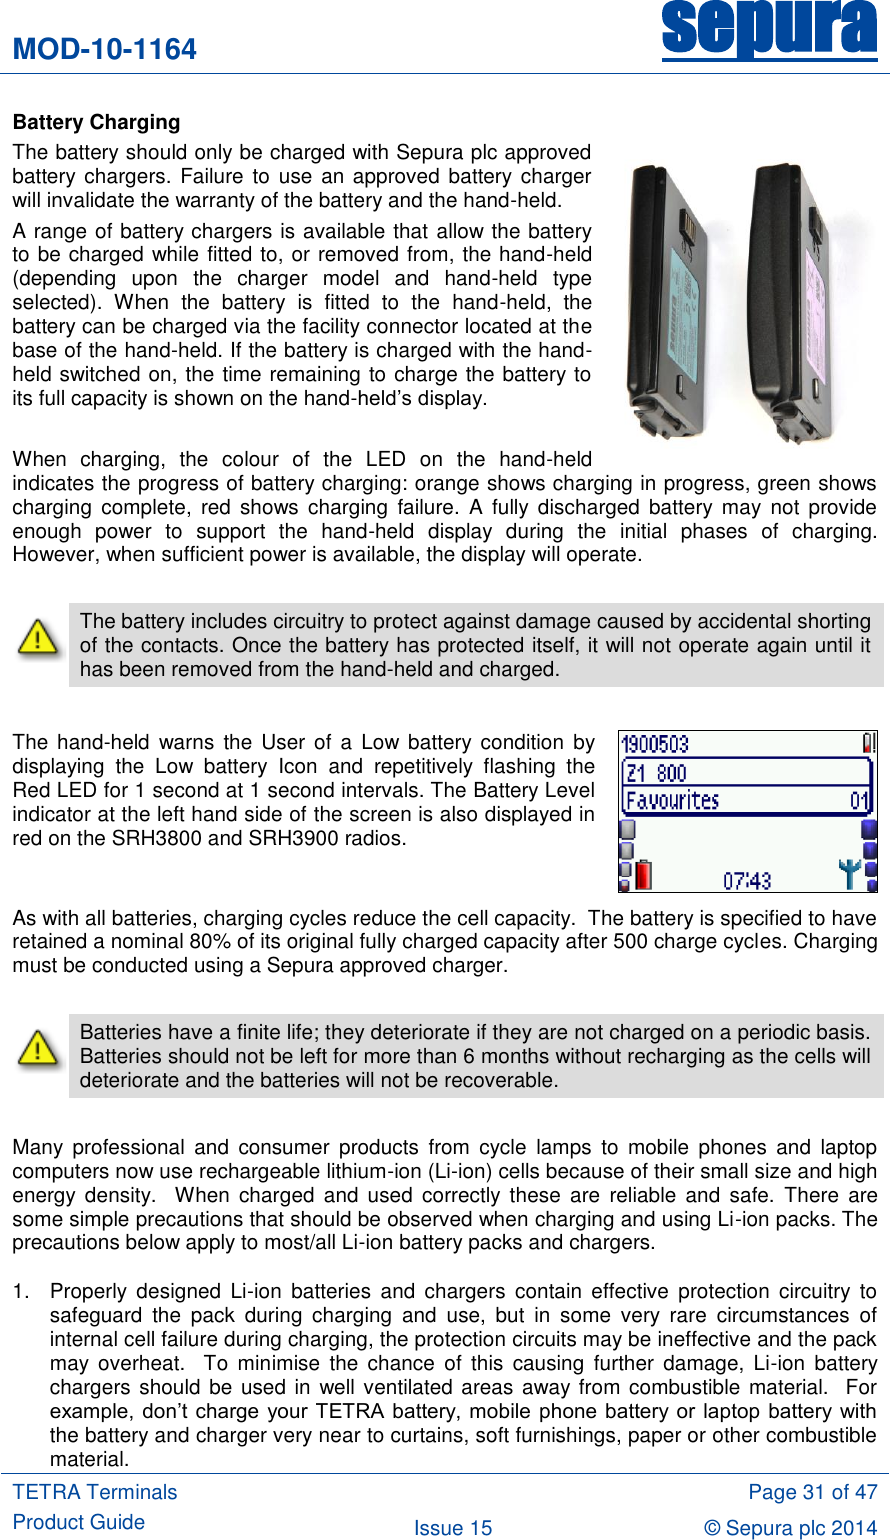 MOD-10-1164 sepura  TETRA Terminals Product Guide  Page 31 of 47 Issue 15 © Sepura plc 2014   Battery Charging The battery should only be charged with Sepura plc approved battery chargers.  Failure to use an approved battery charger will invalidate the warranty of the battery and the hand-held. A range of battery chargers is available that allow the battery to be charged while fitted to, or removed from, the hand-held (depending  upon  the  charger  model  and  hand-held  type selected).  When  the  battery  is  fitted  to  the  hand-held,  the battery can be charged via the facility connector located at the base of the hand-held. If the battery is charged with the hand-held switched on, the time remaining to charge the battery to its full capacity is shown on the hand-held‟s display.  When  charging,  the  colour  of  the  LED  on  the  hand-held indicates the progress of battery charging: orange shows charging in progress, green shows charging  complete,  red  shows  charging  failure.  A  fully discharged  battery  may  not  provide enough  power  to  support  the  hand-held  display  during  the  initial  phases  of  charging. However, when sufficient power is available, the display will operate.   The battery includes circuitry to protect against damage caused by accidental shorting of the contacts. Once the battery has protected itself, it will not operate again until it has been removed from the hand-held and charged.  The  hand-held  warns  the User  of a  Low battery condition  by displaying  the  Low  battery  Icon  and  repetitively  flashing  the Red LED for 1 second at 1 second intervals. The Battery Level indicator at the left hand side of the screen is also displayed in red on the SRH3800 and SRH3900 radios.  As with all batteries, charging cycles reduce the cell capacity.  The battery is specified to have retained a nominal 80% of its original fully charged capacity after 500 charge cycles. Charging must be conducted using a Sepura approved charger.   Batteries have a finite life; they deteriorate if they are not charged on a periodic basis.  Batteries should not be left for more than 6 months without recharging as the cells will deteriorate and the batteries will not be recoverable.  Many  professional  and  consumer  products  from  cycle  lamps  to  mobile  phones  and  laptop computers now use rechargeable lithium-ion (Li-ion) cells because of their small size and high energy  density.   When  charged  and  used  correctly  these  are  reliable  and  safe.  There  are some simple precautions that should be observed when charging and using Li-ion packs. The precautions below apply to most/all Li-ion battery packs and chargers. 1.  Properly  designed  Li-ion  batteries  and  chargers  contain  effective  protection  circuitry  to safeguard  the  pack  during  charging  and  use,  but  in  some  very  rare  circumstances  of internal cell failure during charging, the protection circuits may be ineffective and the pack may  overheat.   To  minimise  the  chance  of  this  causing  further  damage,  Li-ion  battery chargers should be used  in well ventilated areas away from combustible material.  For example,  don‟t  charge  your TETRA  battery, mobile phone  battery or  laptop battery with the battery and charger very near to curtains, soft furnishings, paper or other combustible material. 